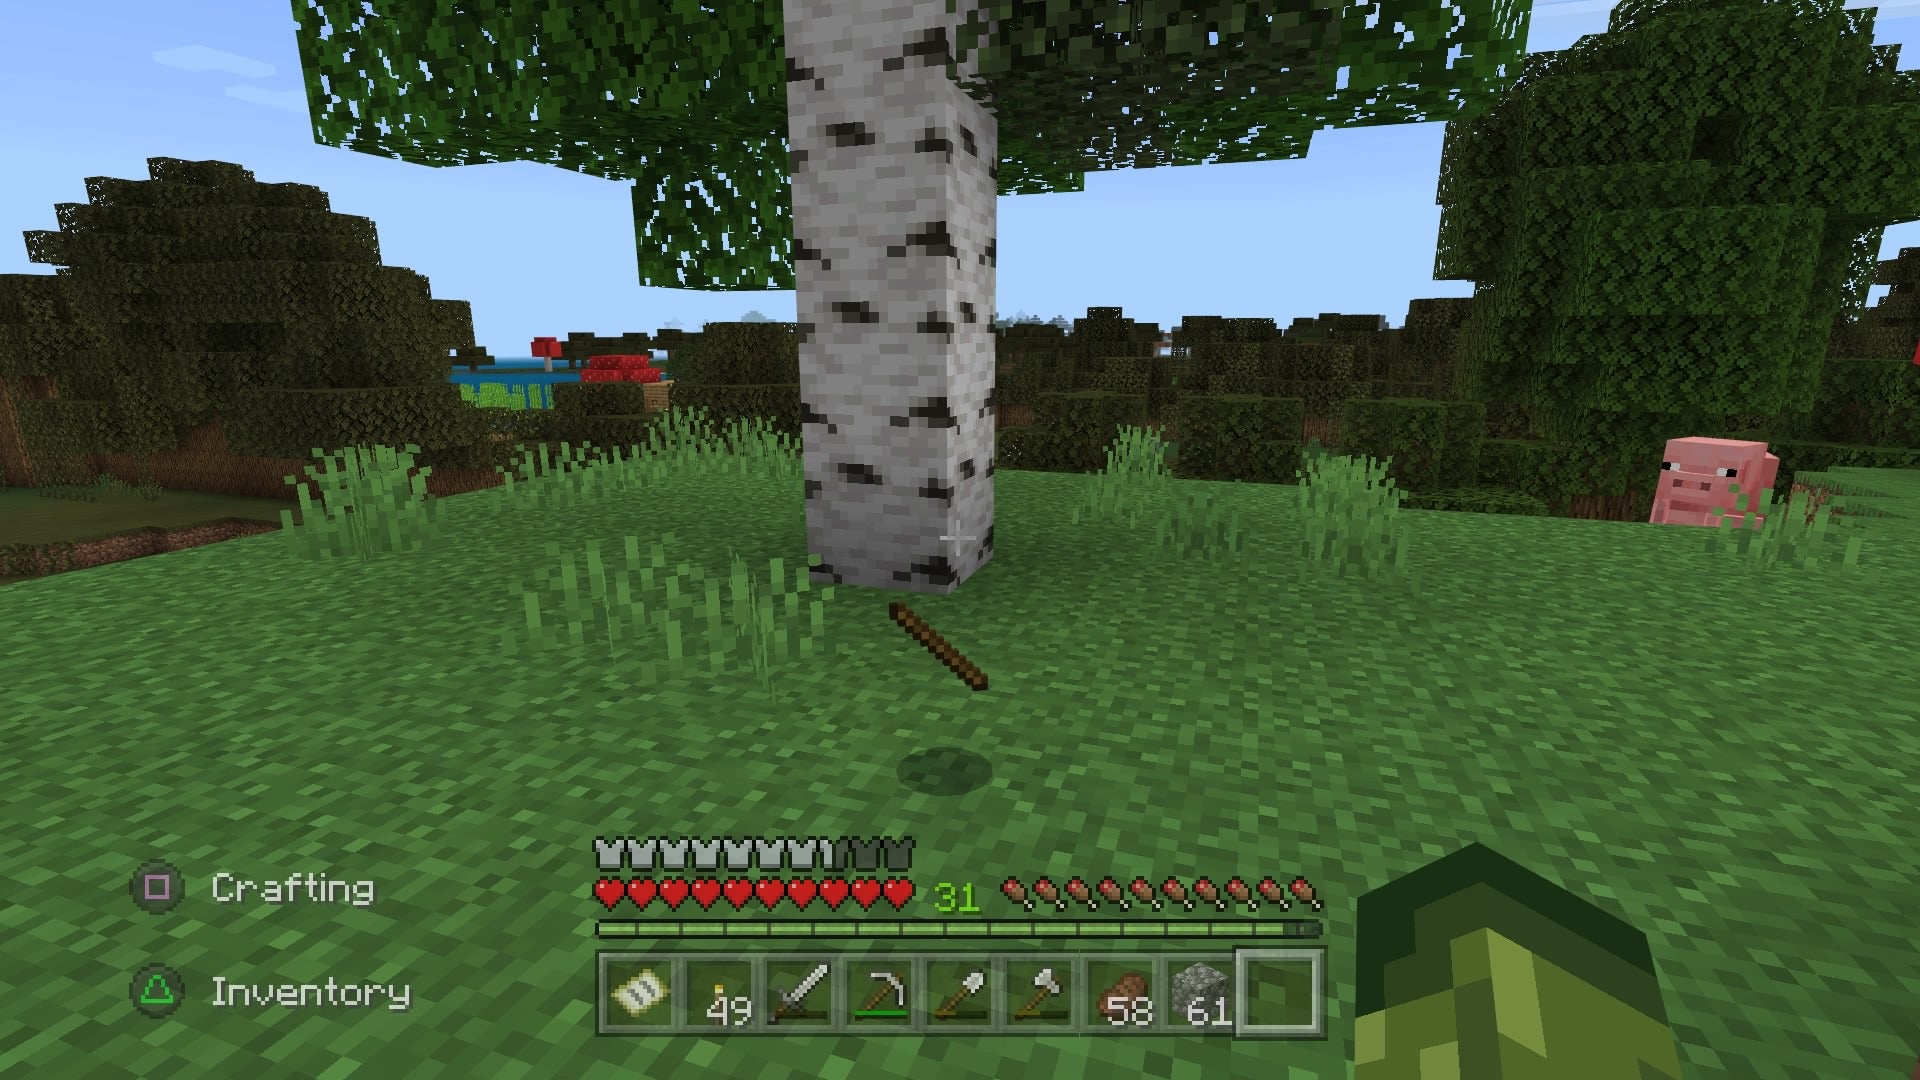 A stick on the grassy ground in front of a white and black birch tree in Minecraft.